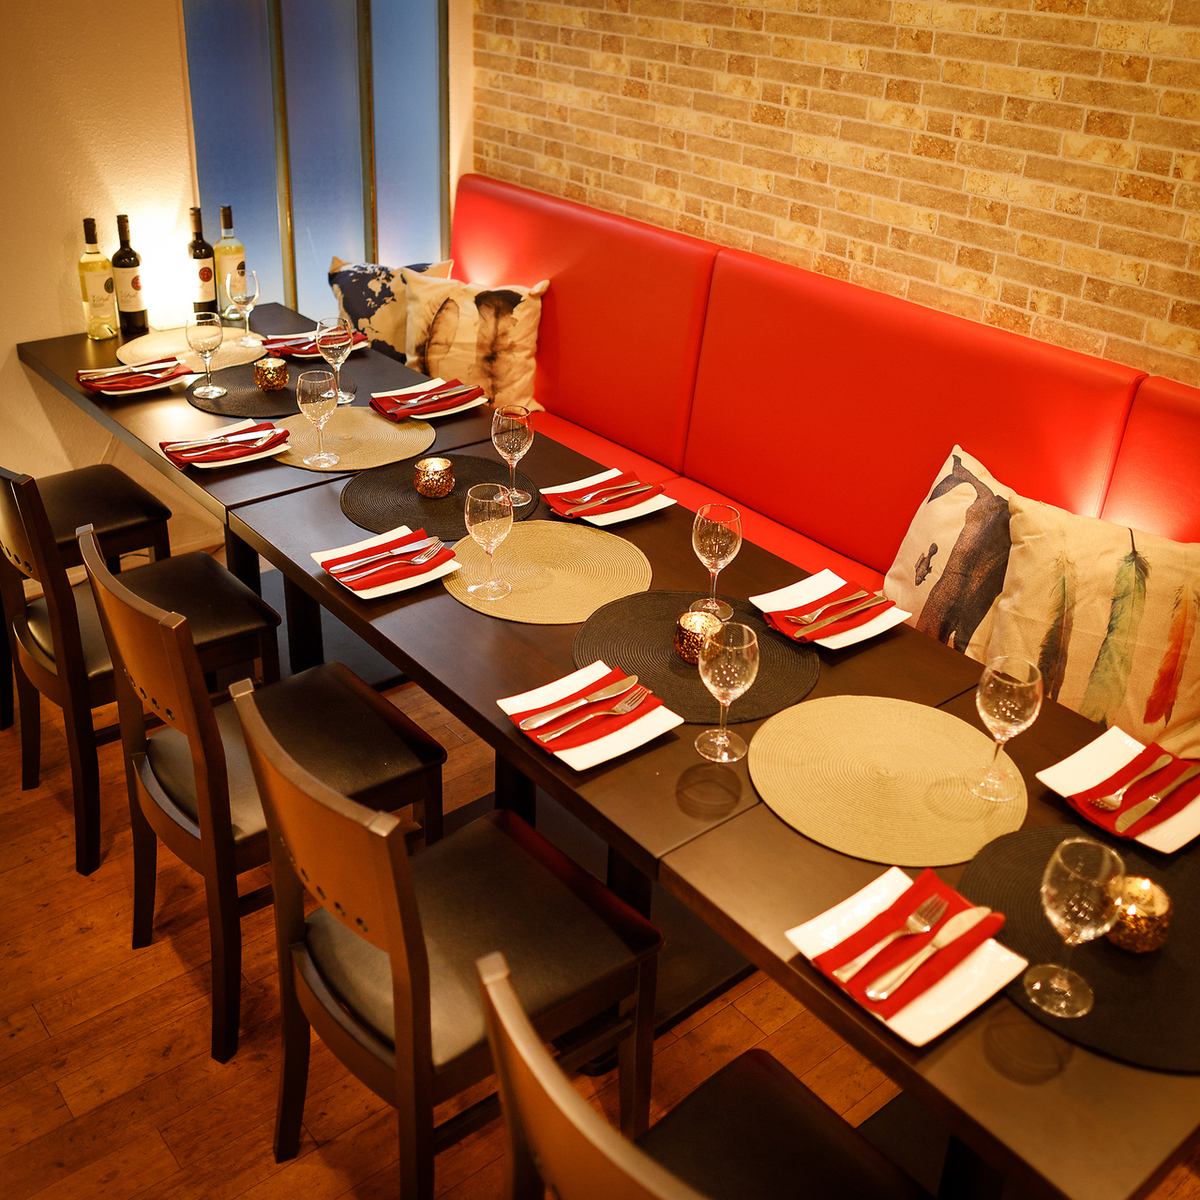 Completely private space★Perfect for dates, banquets, and girls' night out◎